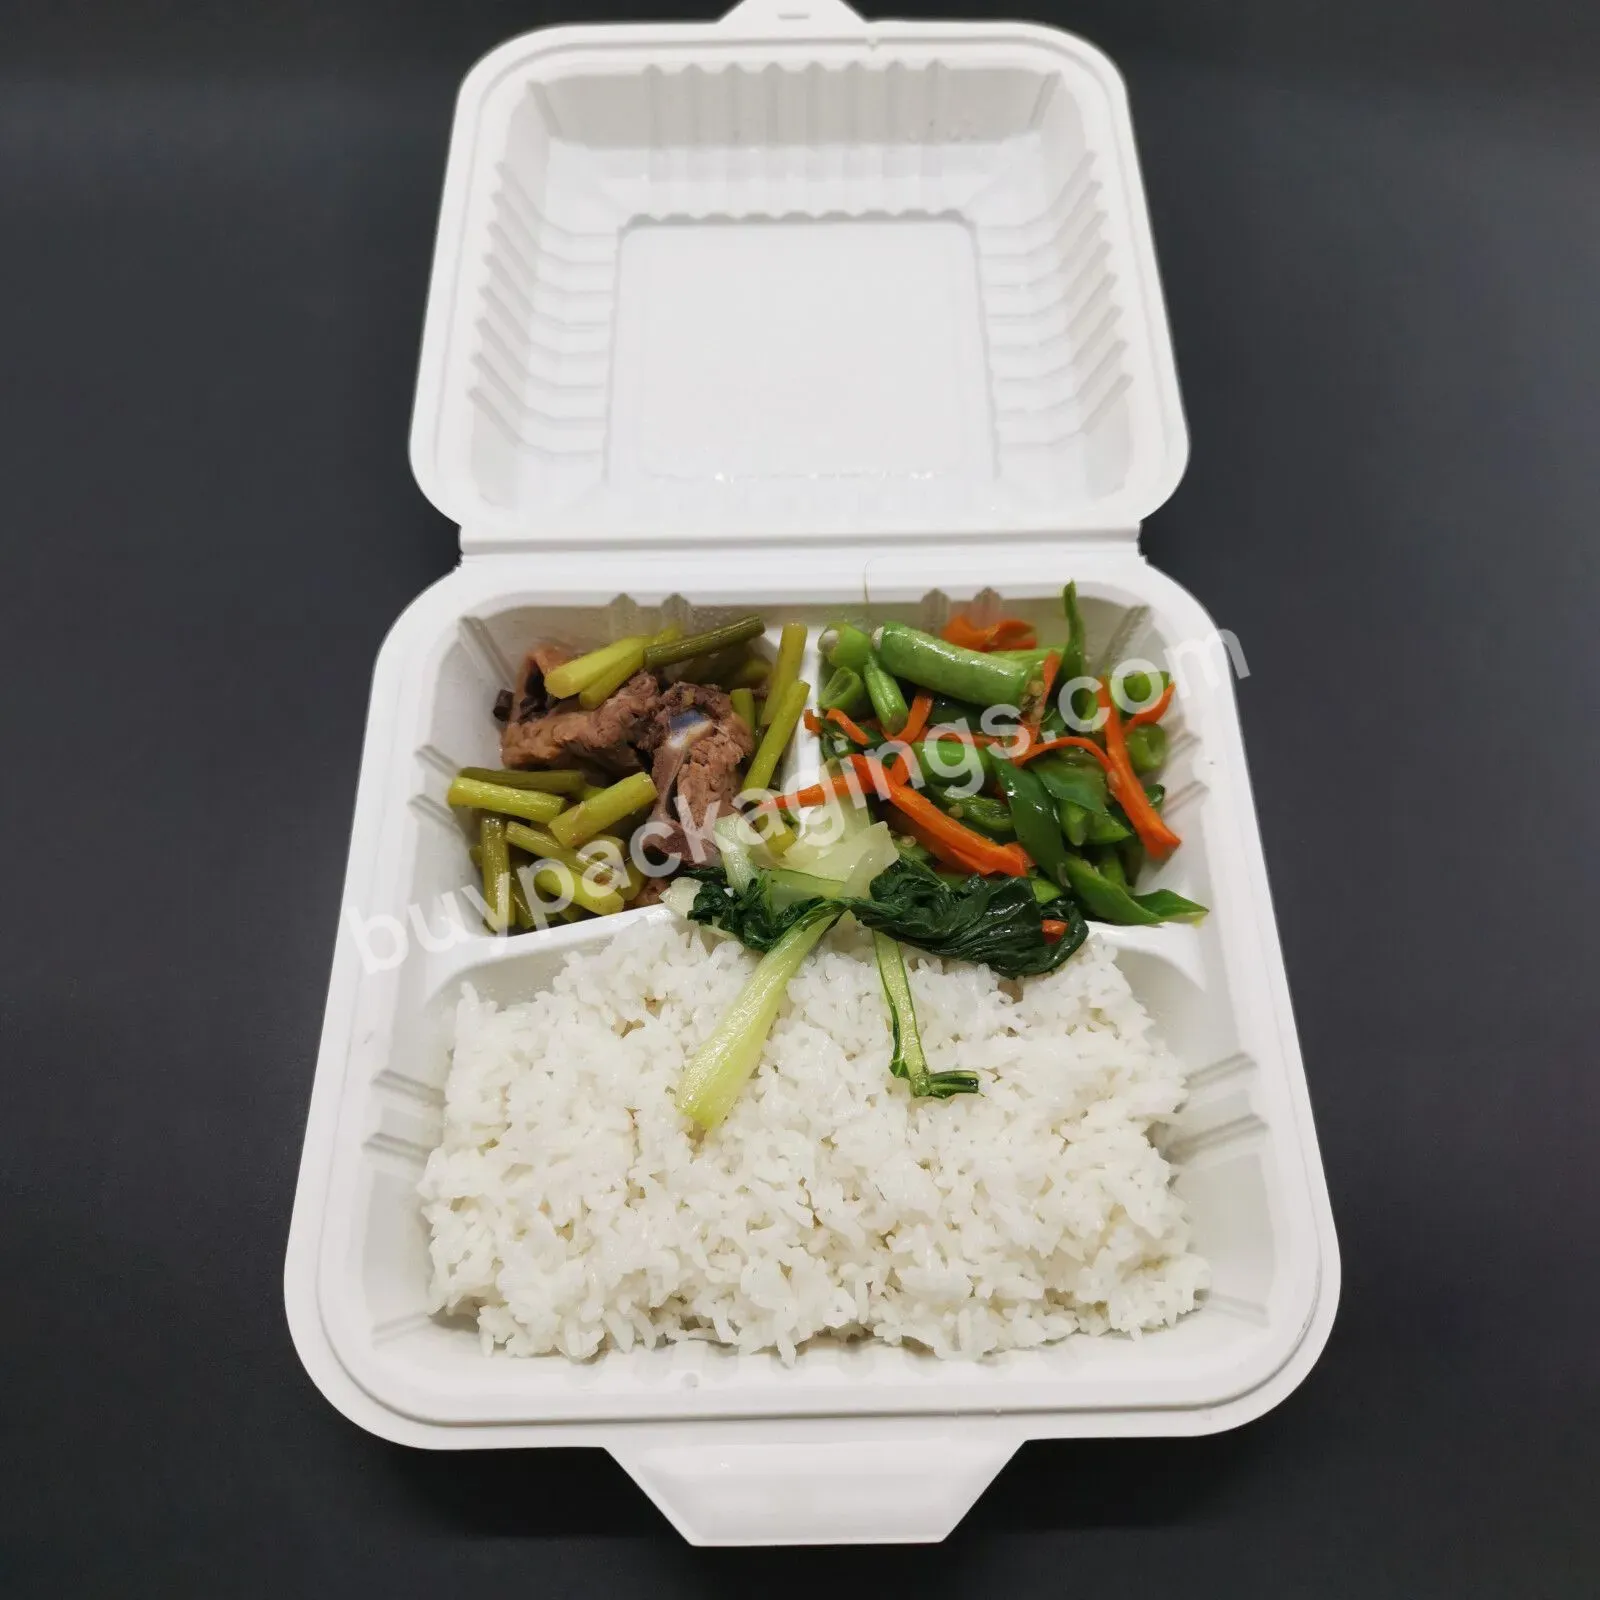 Biodegradable Microwave Disposable Thermoformed Pp Meal Prep Container Bento Lunch Clamshell Food Takeaway Box - Buy Clamshell Food Box To Go Container,Thermoformed Disposable Meal Prep Food Container,Microwave Disposable Bento Lunch Food Takeaway Box.